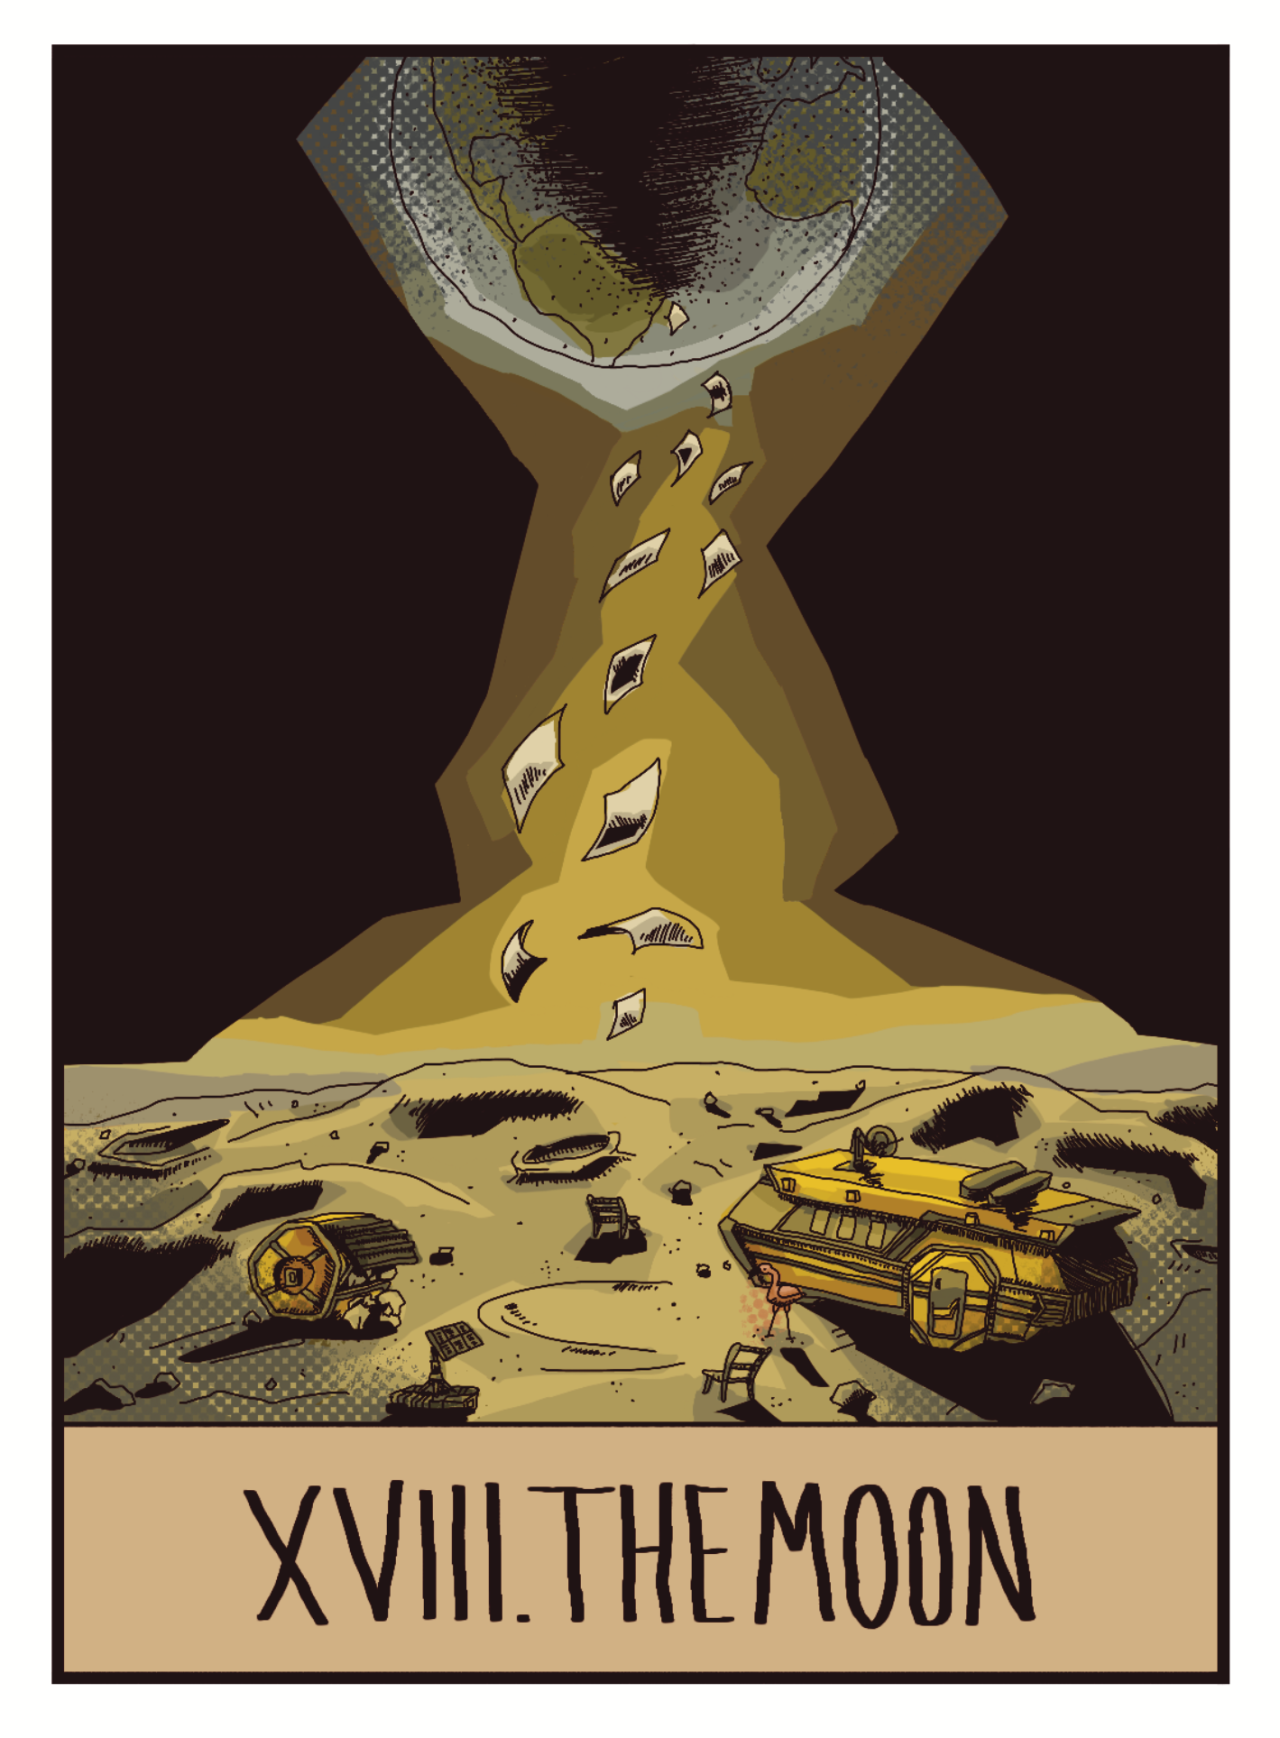 my goal for winter break was to finish two more tarot cards, and i was cutting it pretty close but i did get this second one done! I have been told that Lila probably fits the moon best, and I agree, but I couldn’t resist the moon being.... the moon. Plus, Luther’s mission up here was a deception to control him, so it at least kinda fits. Or thats what I tell myself to justify my choices lol.reminder that this whole series can be found in my tua tarot series tag![ID: a The Umbrella Academy-themed tarot card, illustrated in a way that is supposed to resemble the style of the comics (though how well that is achieved is up for debate). It is The Moon, featuring an illustration of a trail of paper between a distant Earth and Luther’s capsule on the moon. Around the capsule are a dumpster, a few chairs, a solar panel, and a non-canonical plastic flamingo. End ID.] #tua #the umbrella academy #luther hargreeves#is implied#moon #idk man there arent any characters im grasping at straws  #anyway this whole thing from sketch to final adjustments took like. three hours. which is bonkers  #all of the others have taken like... 5+hours if theyre nice to me and i dont have to entirely rework colors or composition  #not having to draw characters speeds things up SO fast lmaooo  #tua tarot series  #